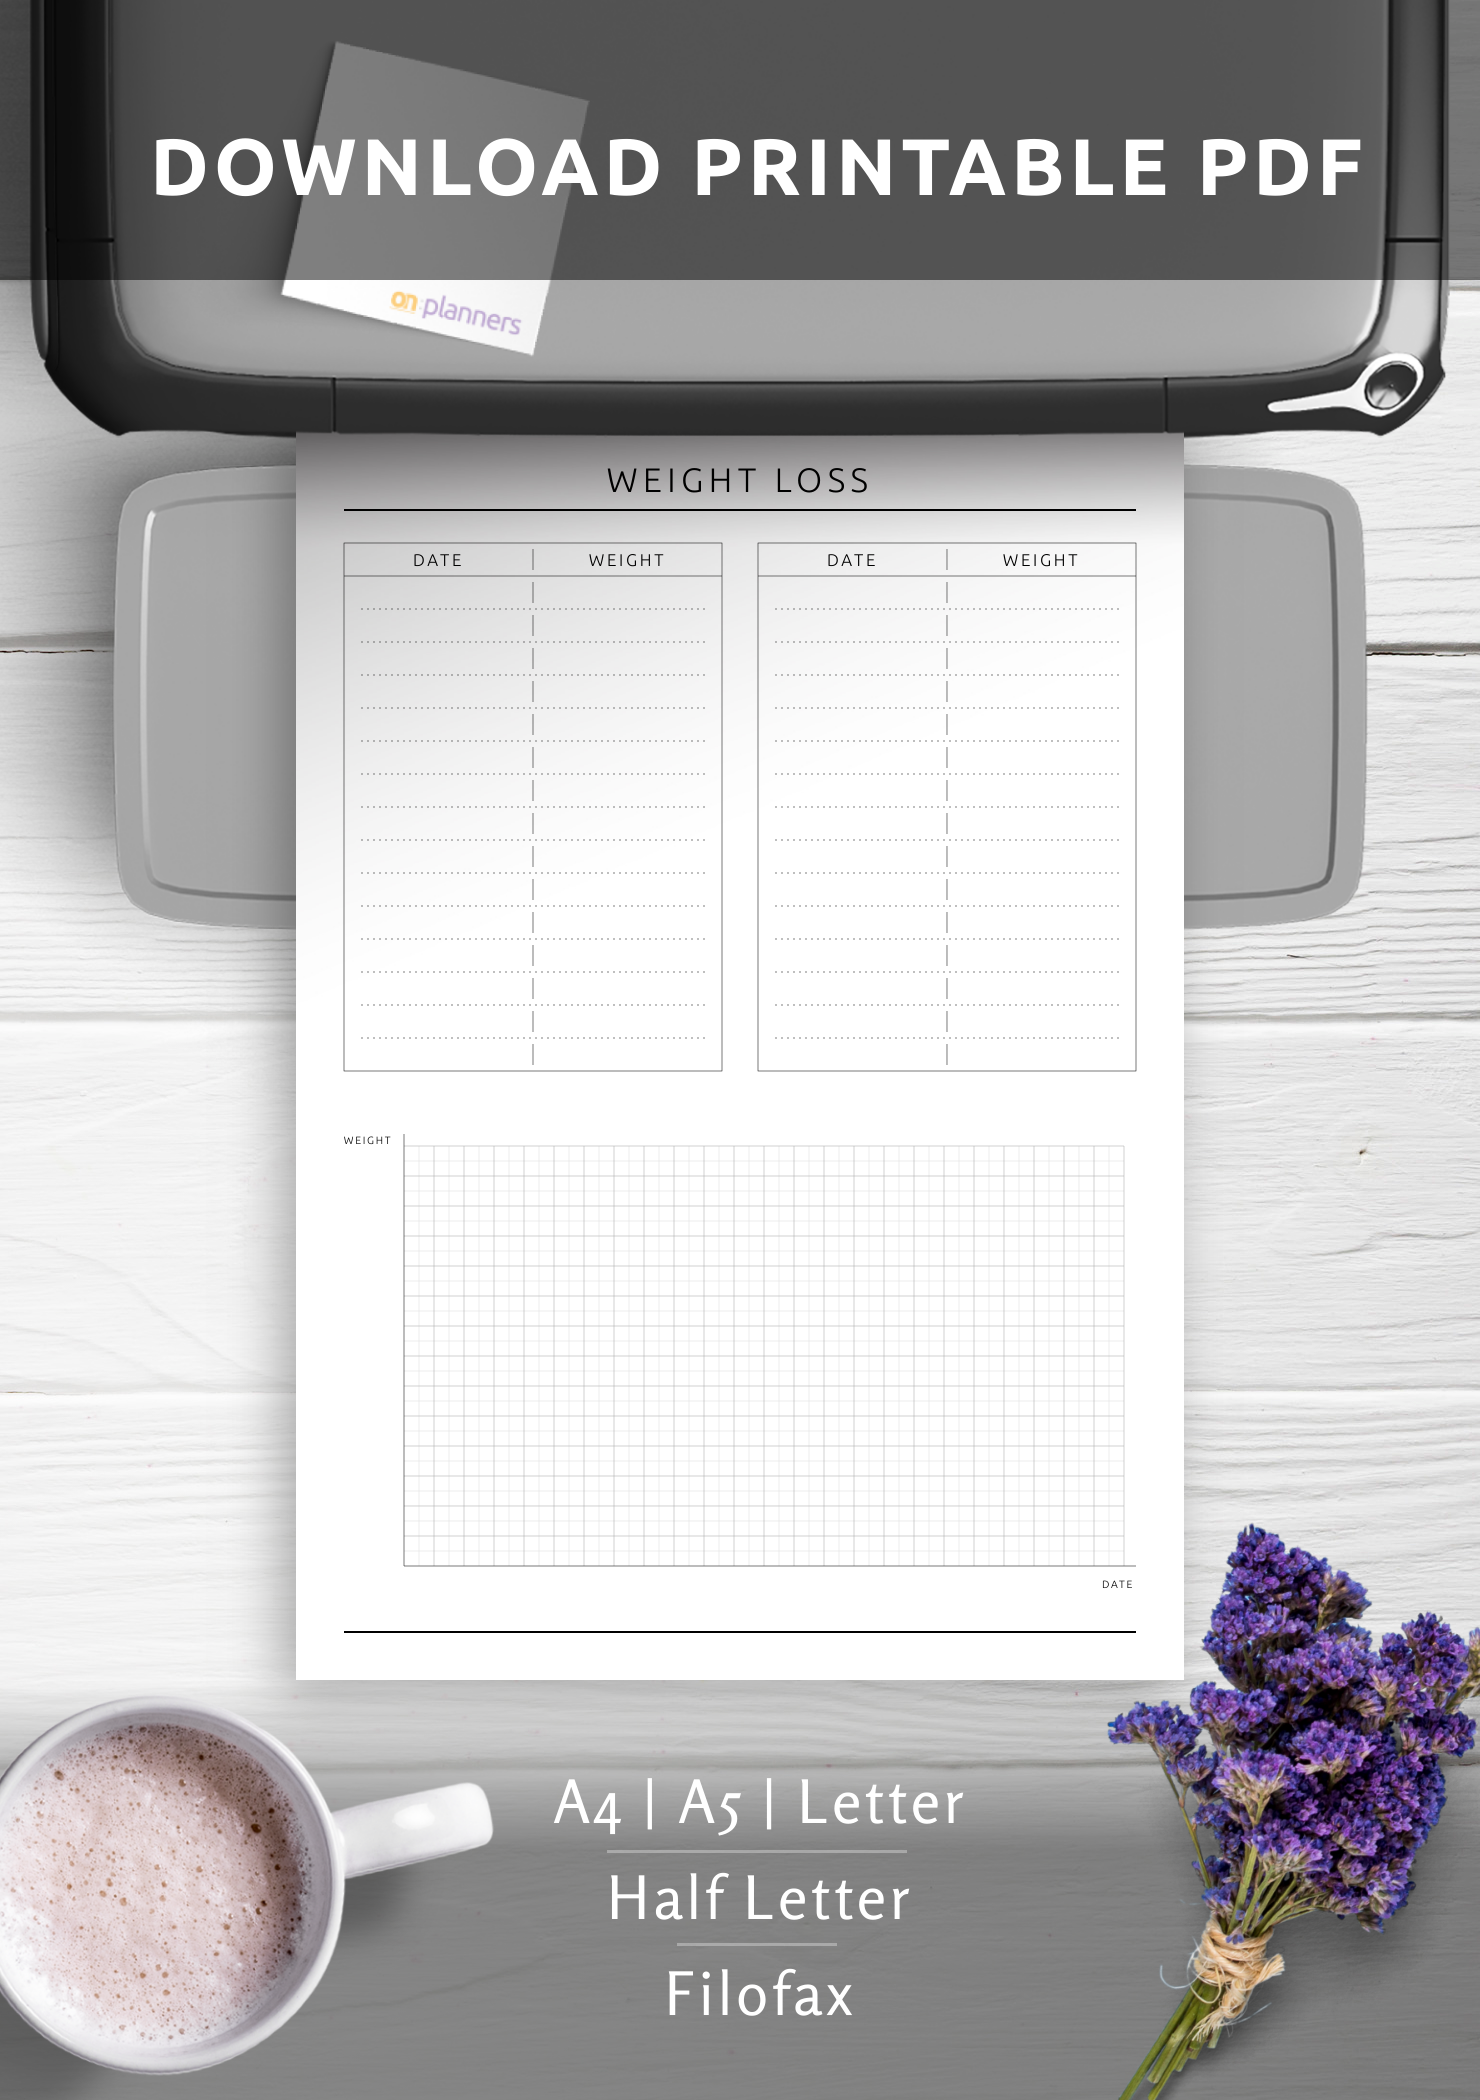 download-printable-weight-loss-tracker-template-pdf